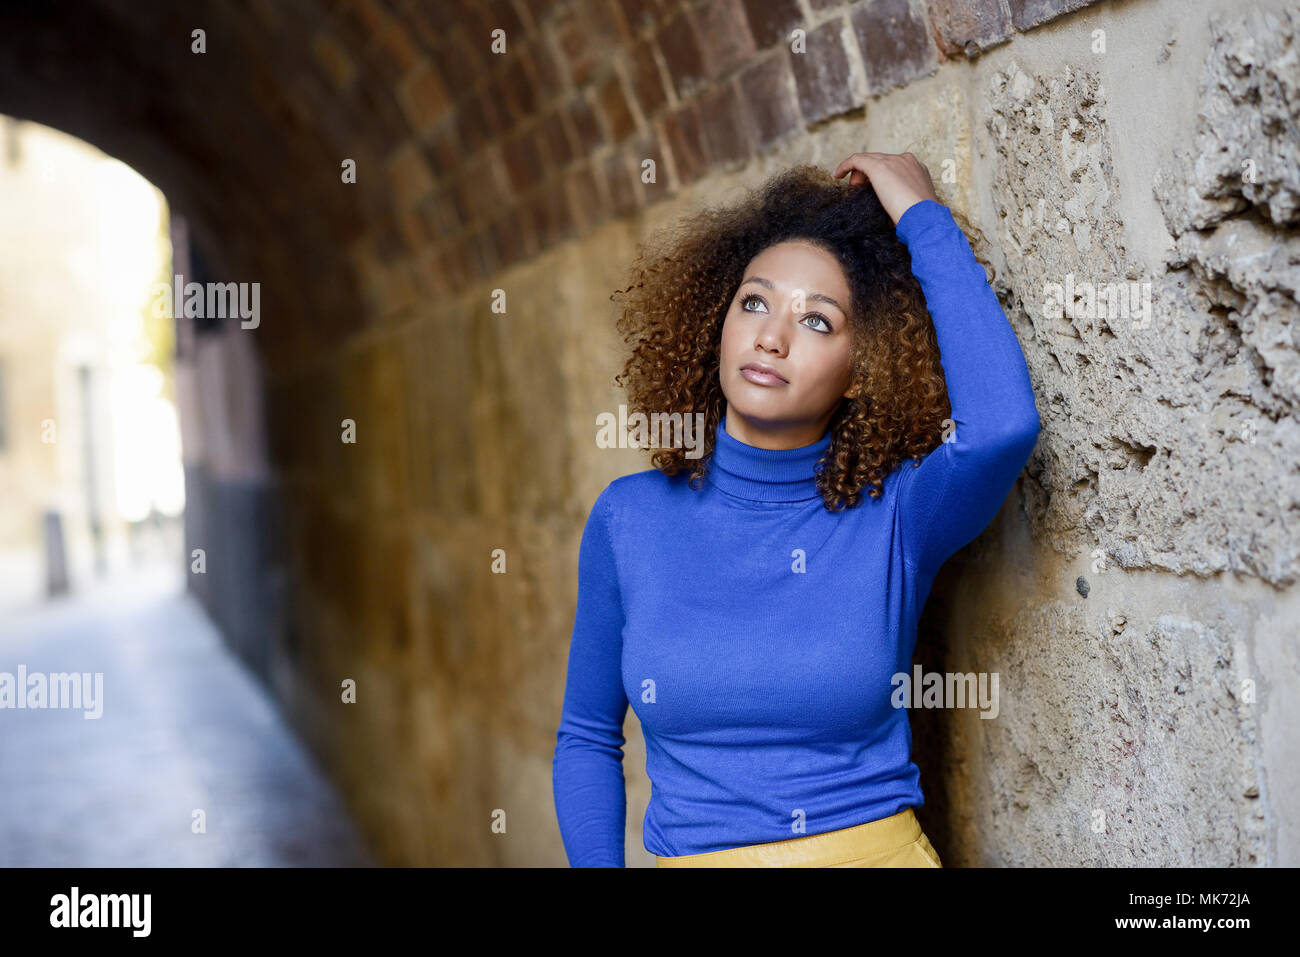 Beautiful young African American woman, model of fashion, with afro hairstyle and green eyes wearing blue sweater in urban background Stock Photo